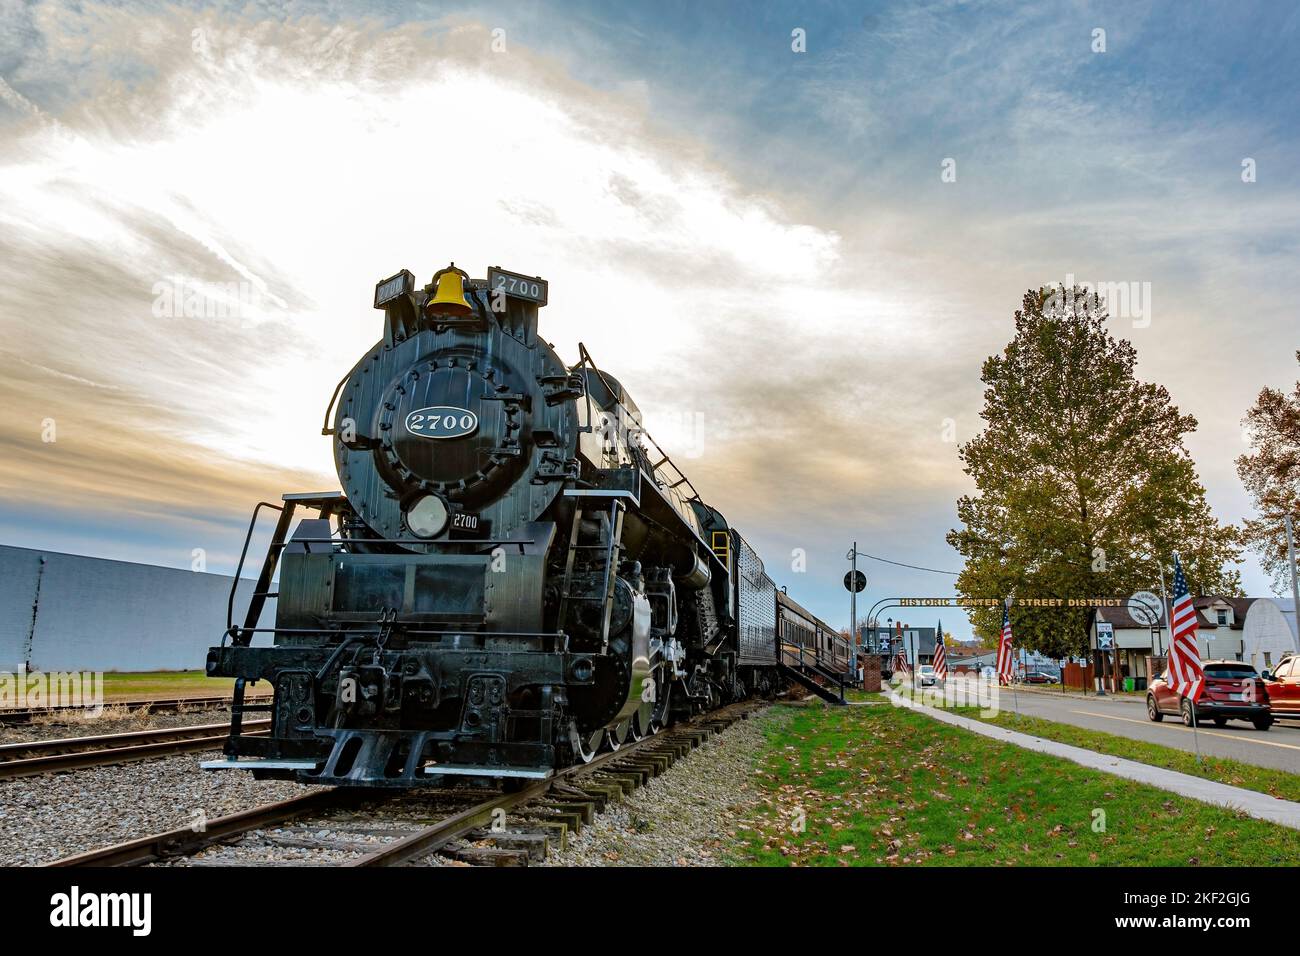 Dennison, Ohio, USA- Oct. 24, 2022: Display locomotive at the Dennison Railroad Depot and Museum in the Historic Center Street District. Stock Photo